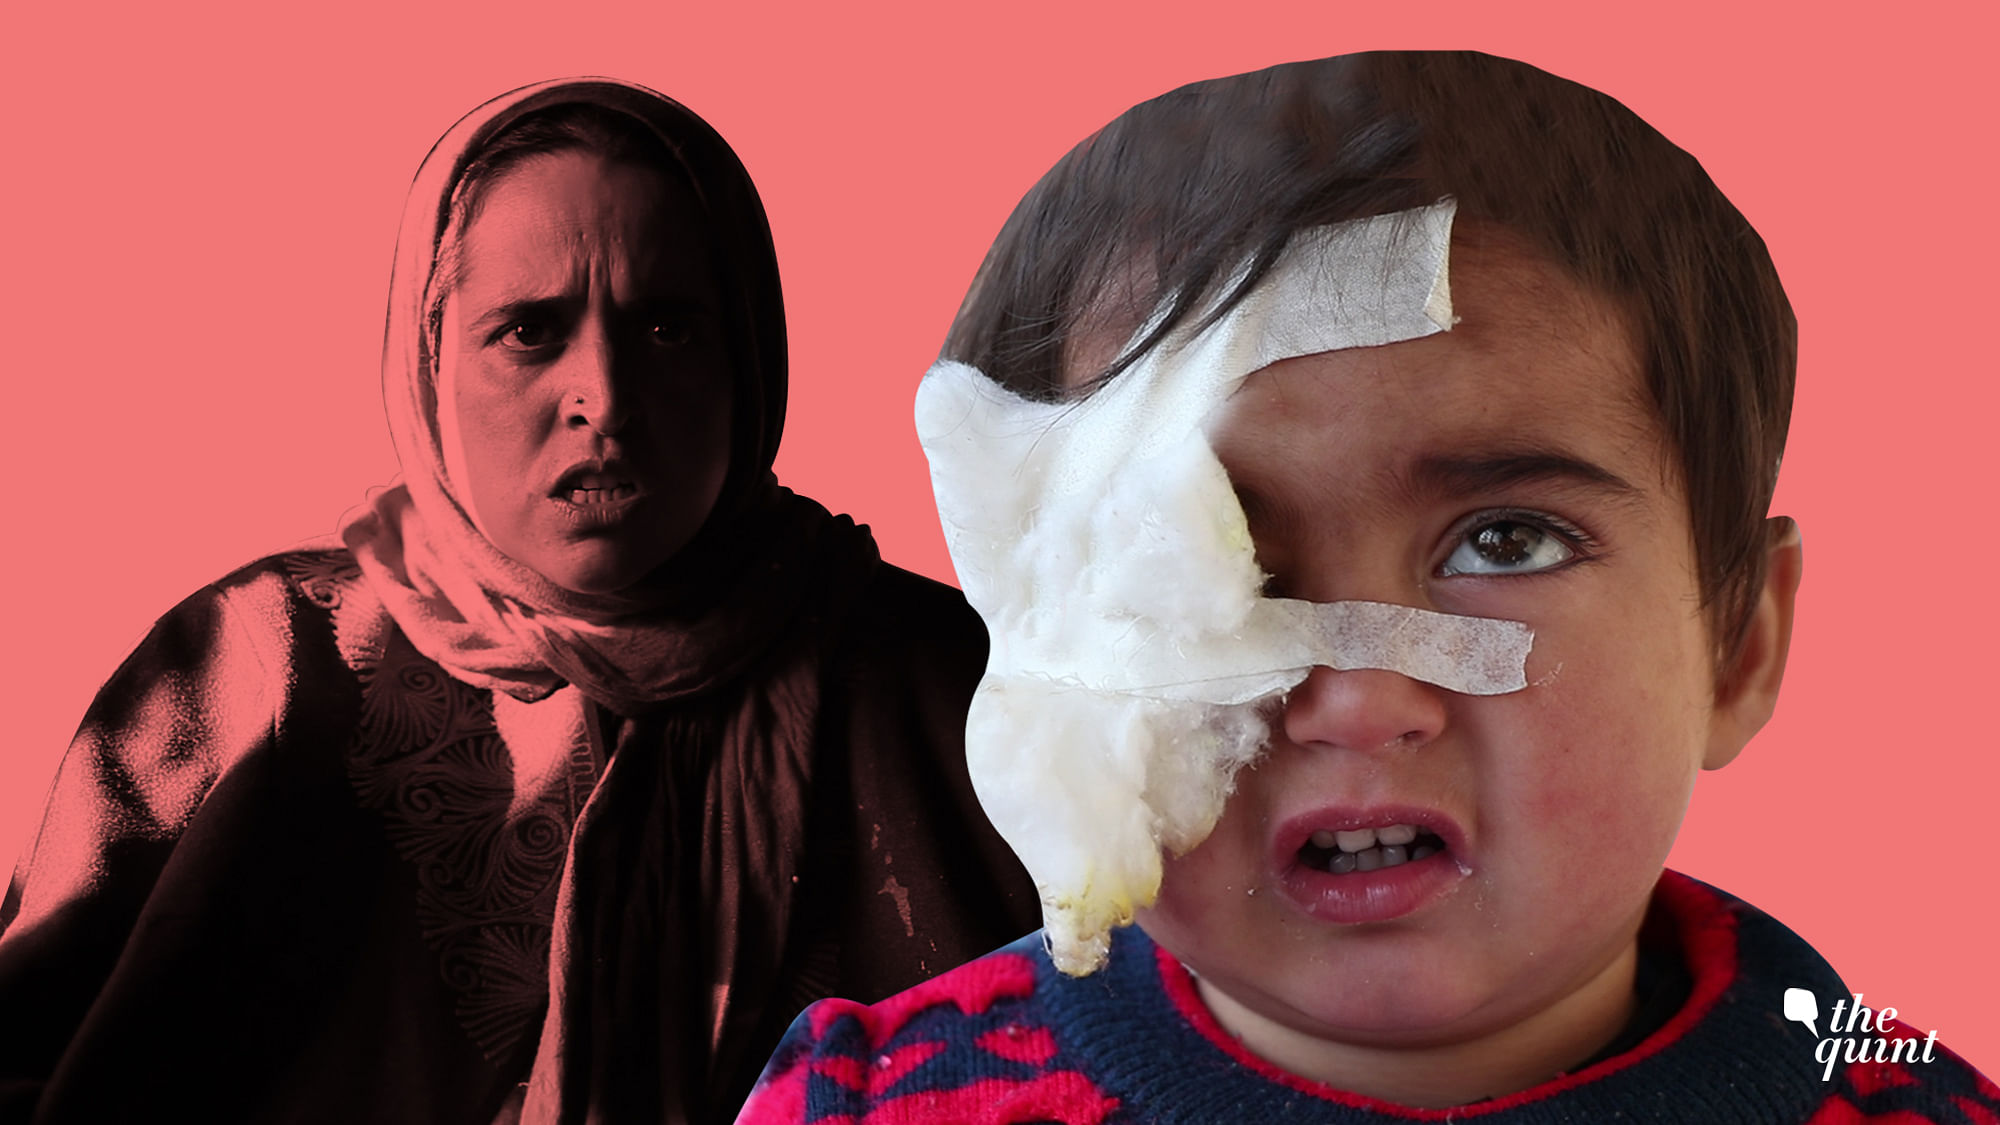  We met Hiba and her family after her surgeries to check her progress. Will she be able to see from her right eye?&nbsp;